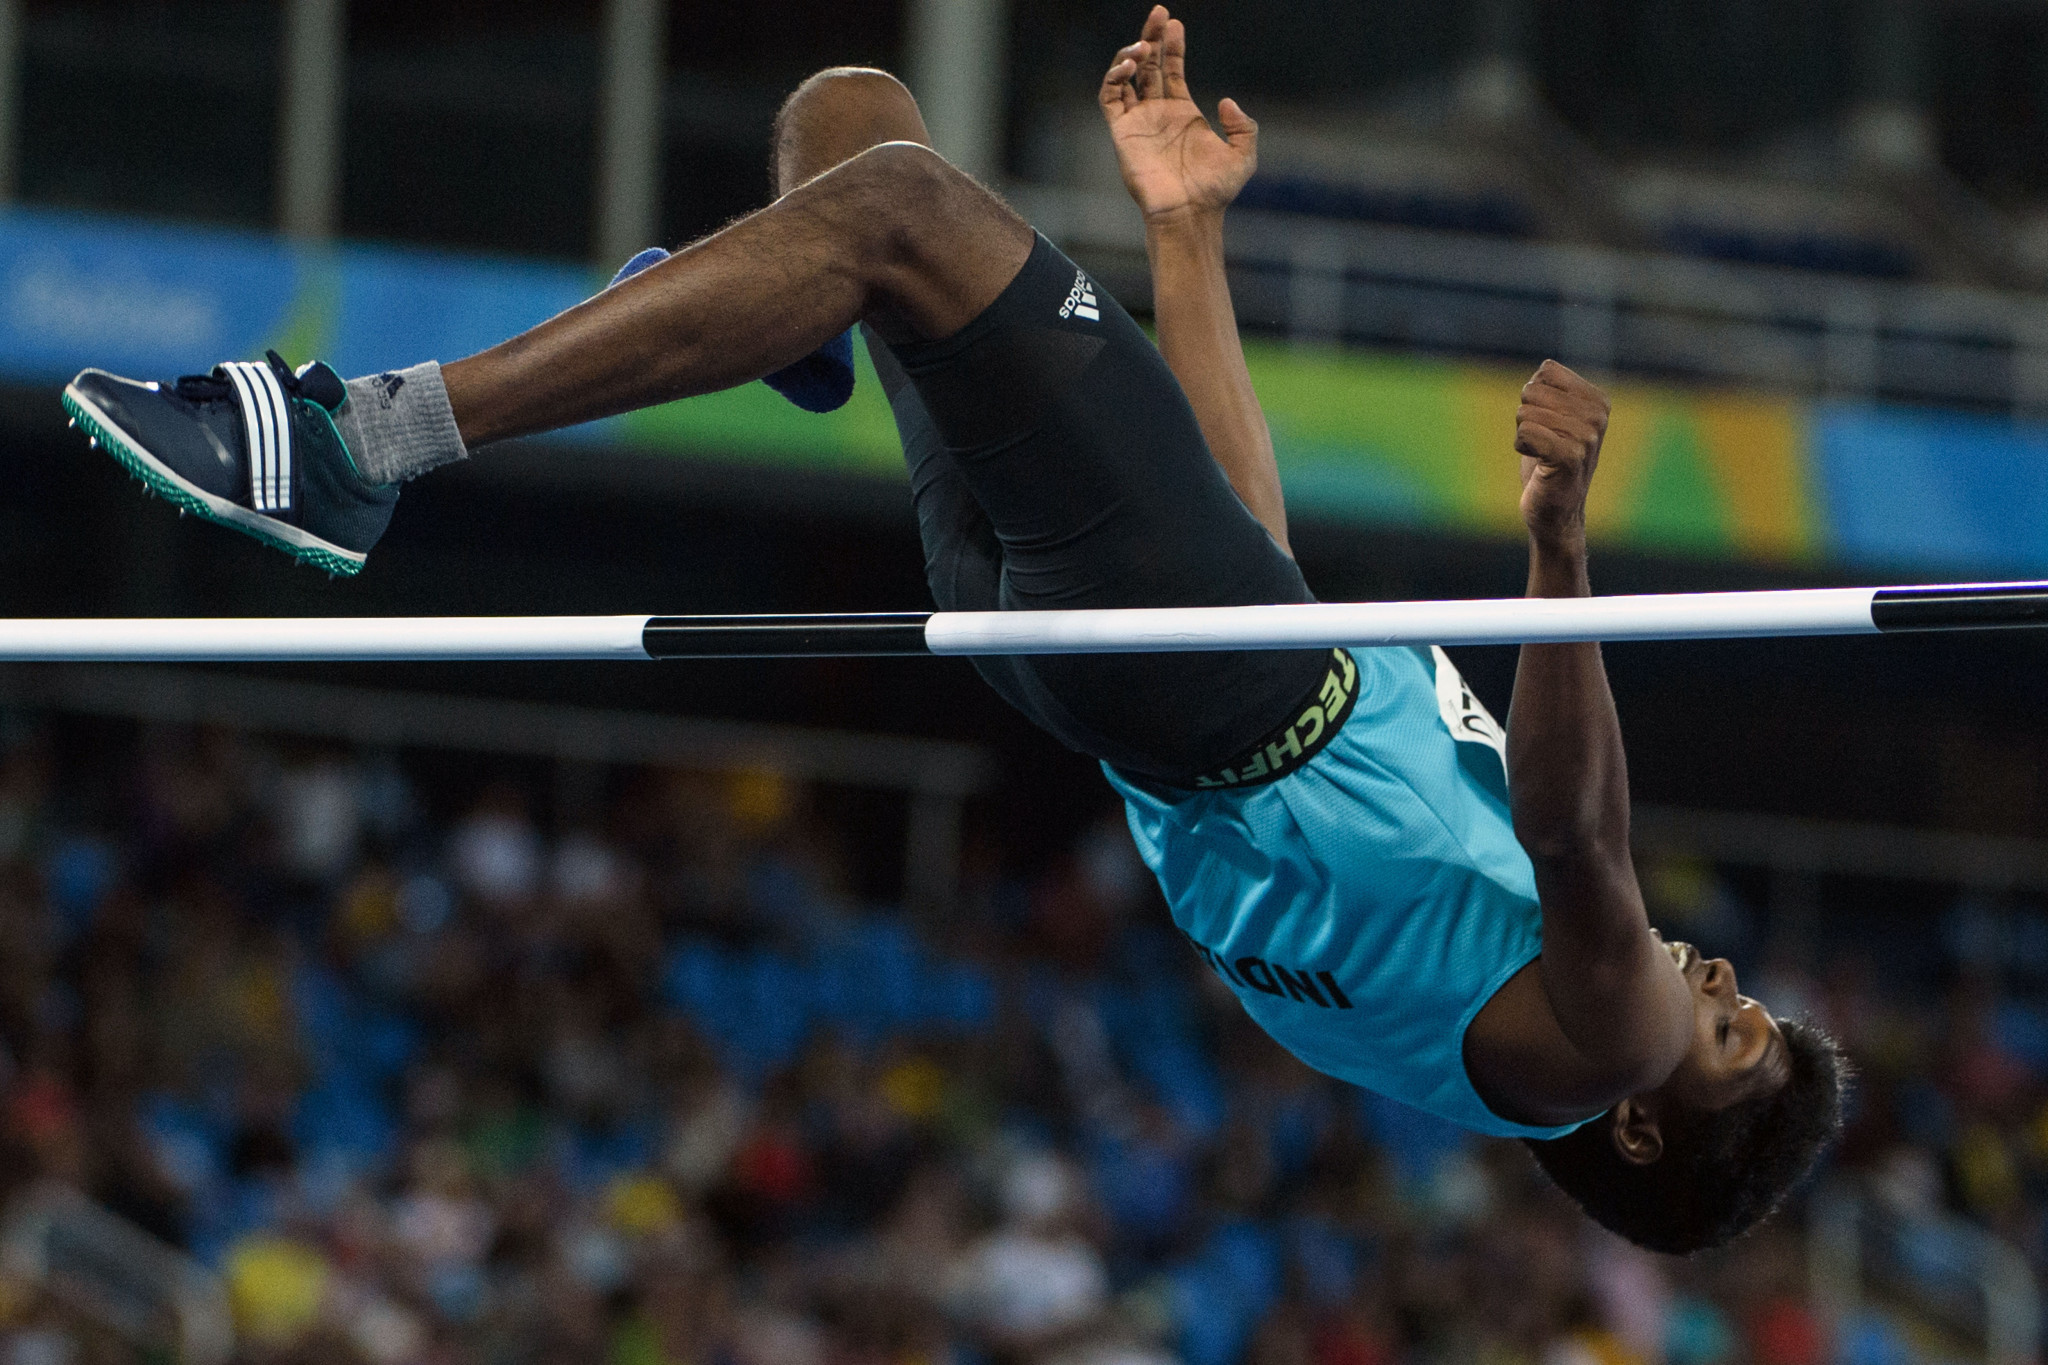 Mariyappan Thangavelu won the men's high jump T42 gold medal at the Rio 2016 Paralympic Games ©Getty Images